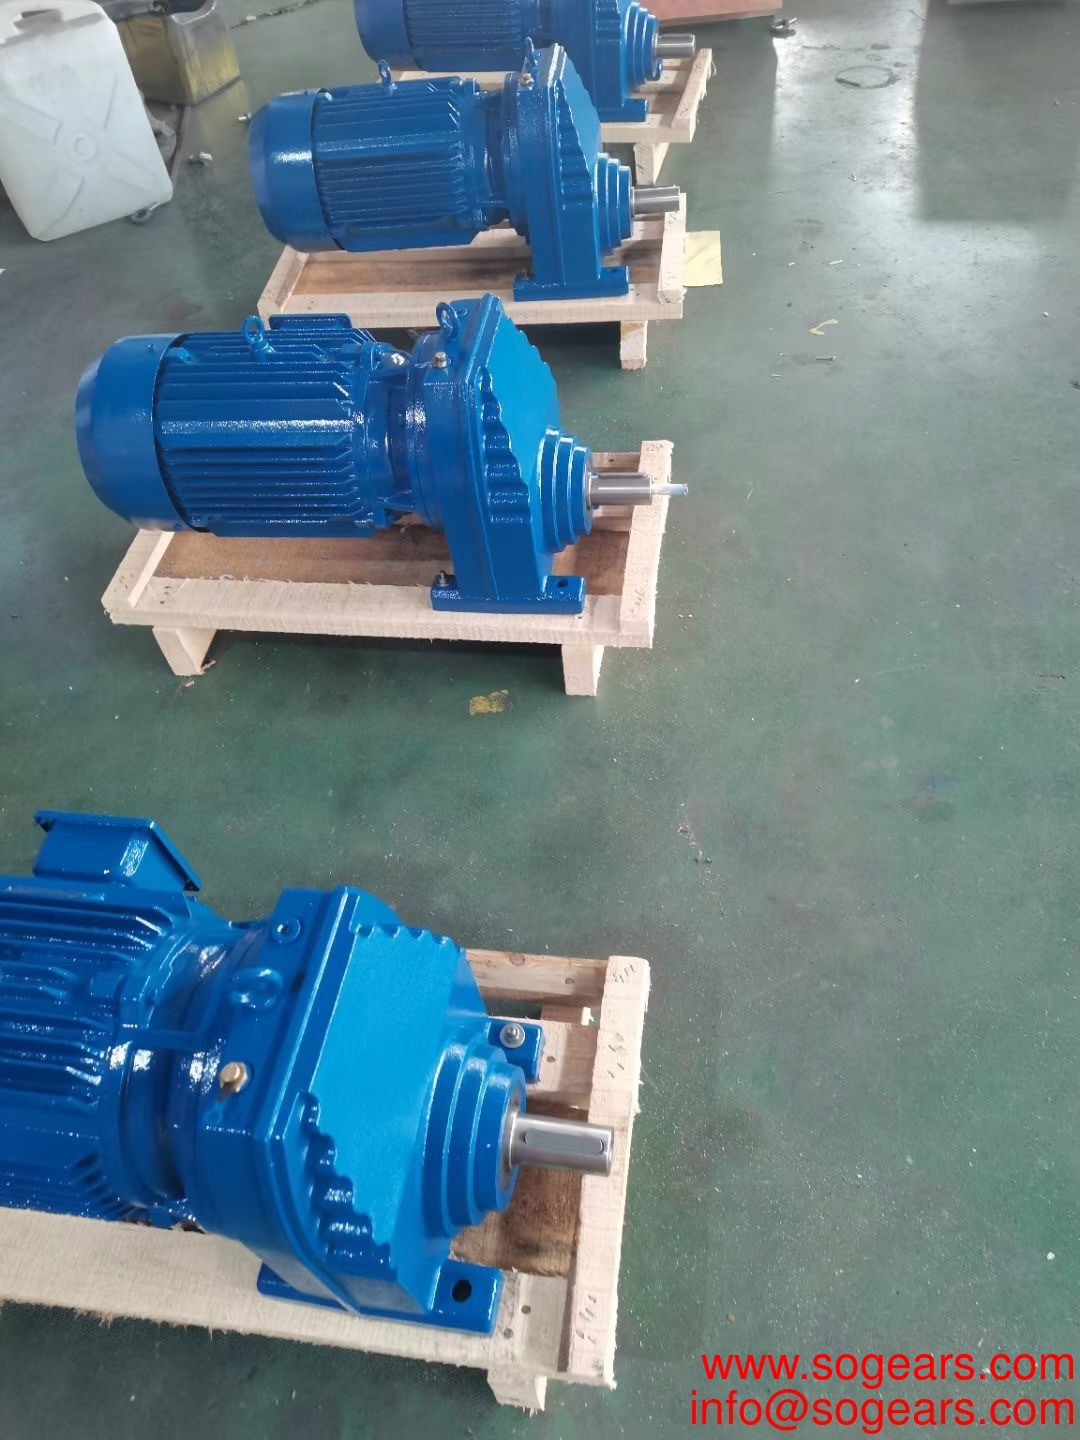 Helical Gear Standard Backlash 7 Arc Planetary Gearbox For 750w Servo Motor Gearbox with Motor Shaft Mounted Gearbox geared motor